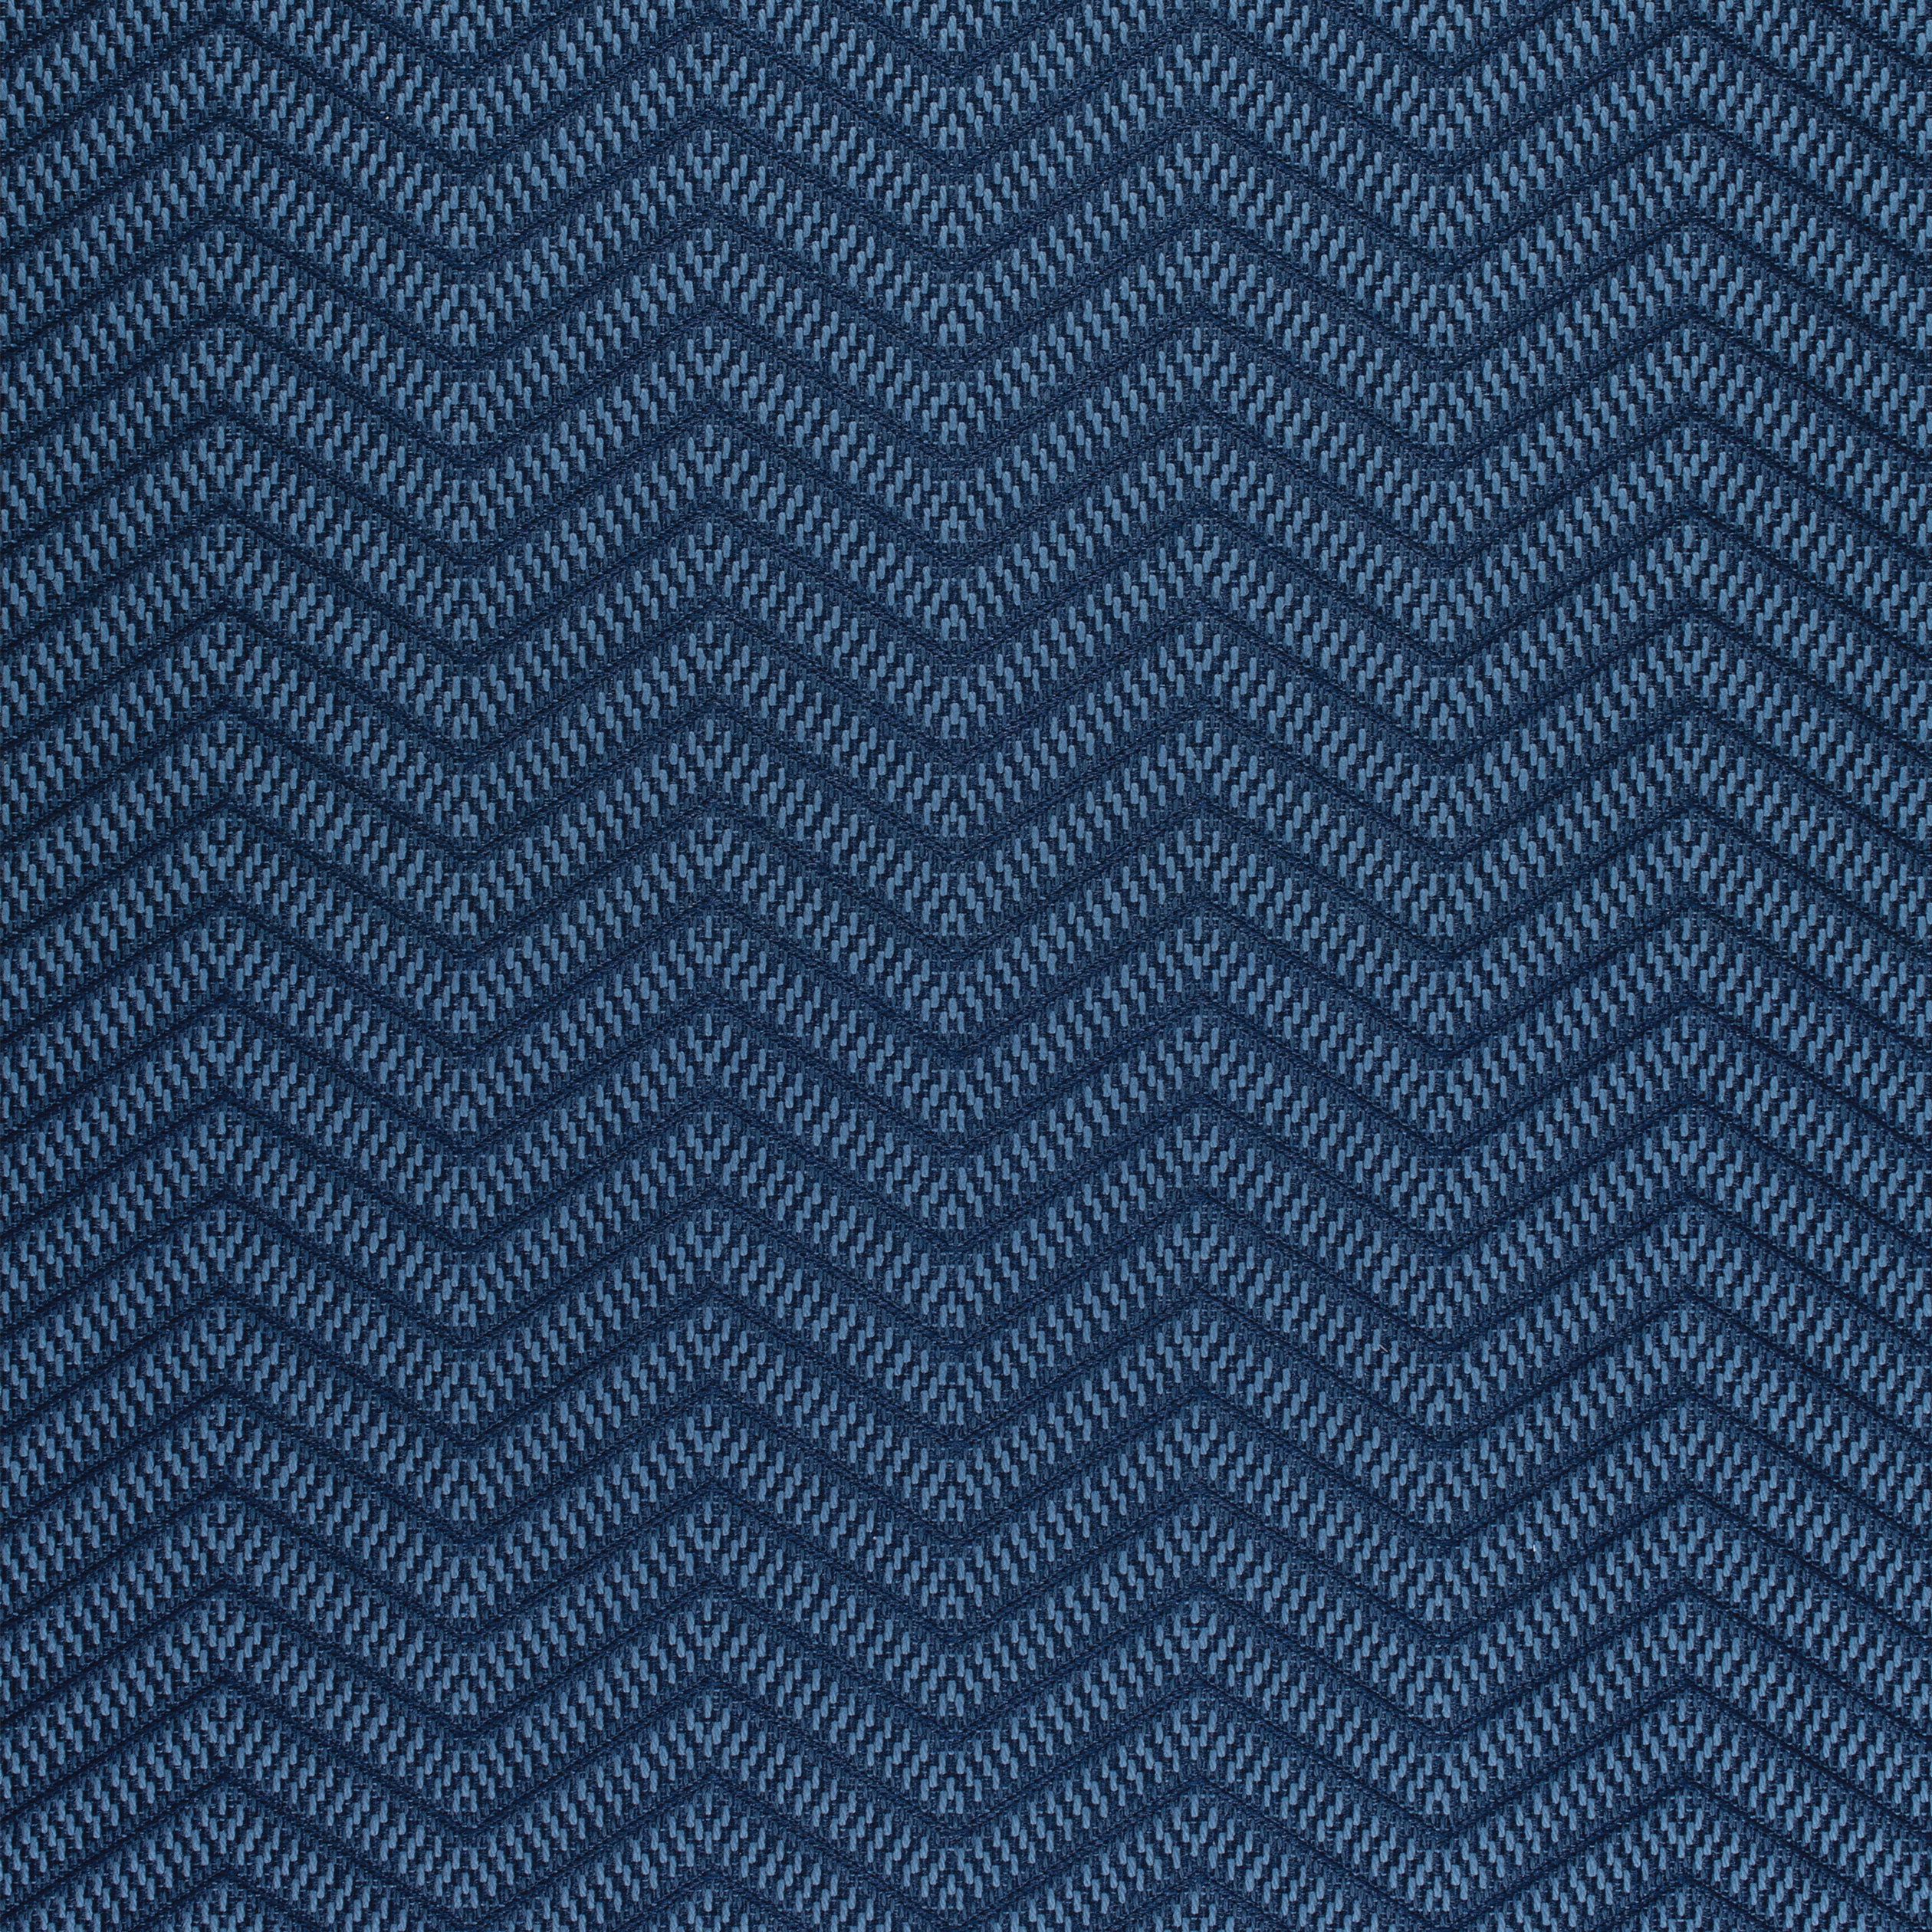 Matari Chevron fabric in blue color - pattern number W80634 - by Thibaut in the Pinnacle collection